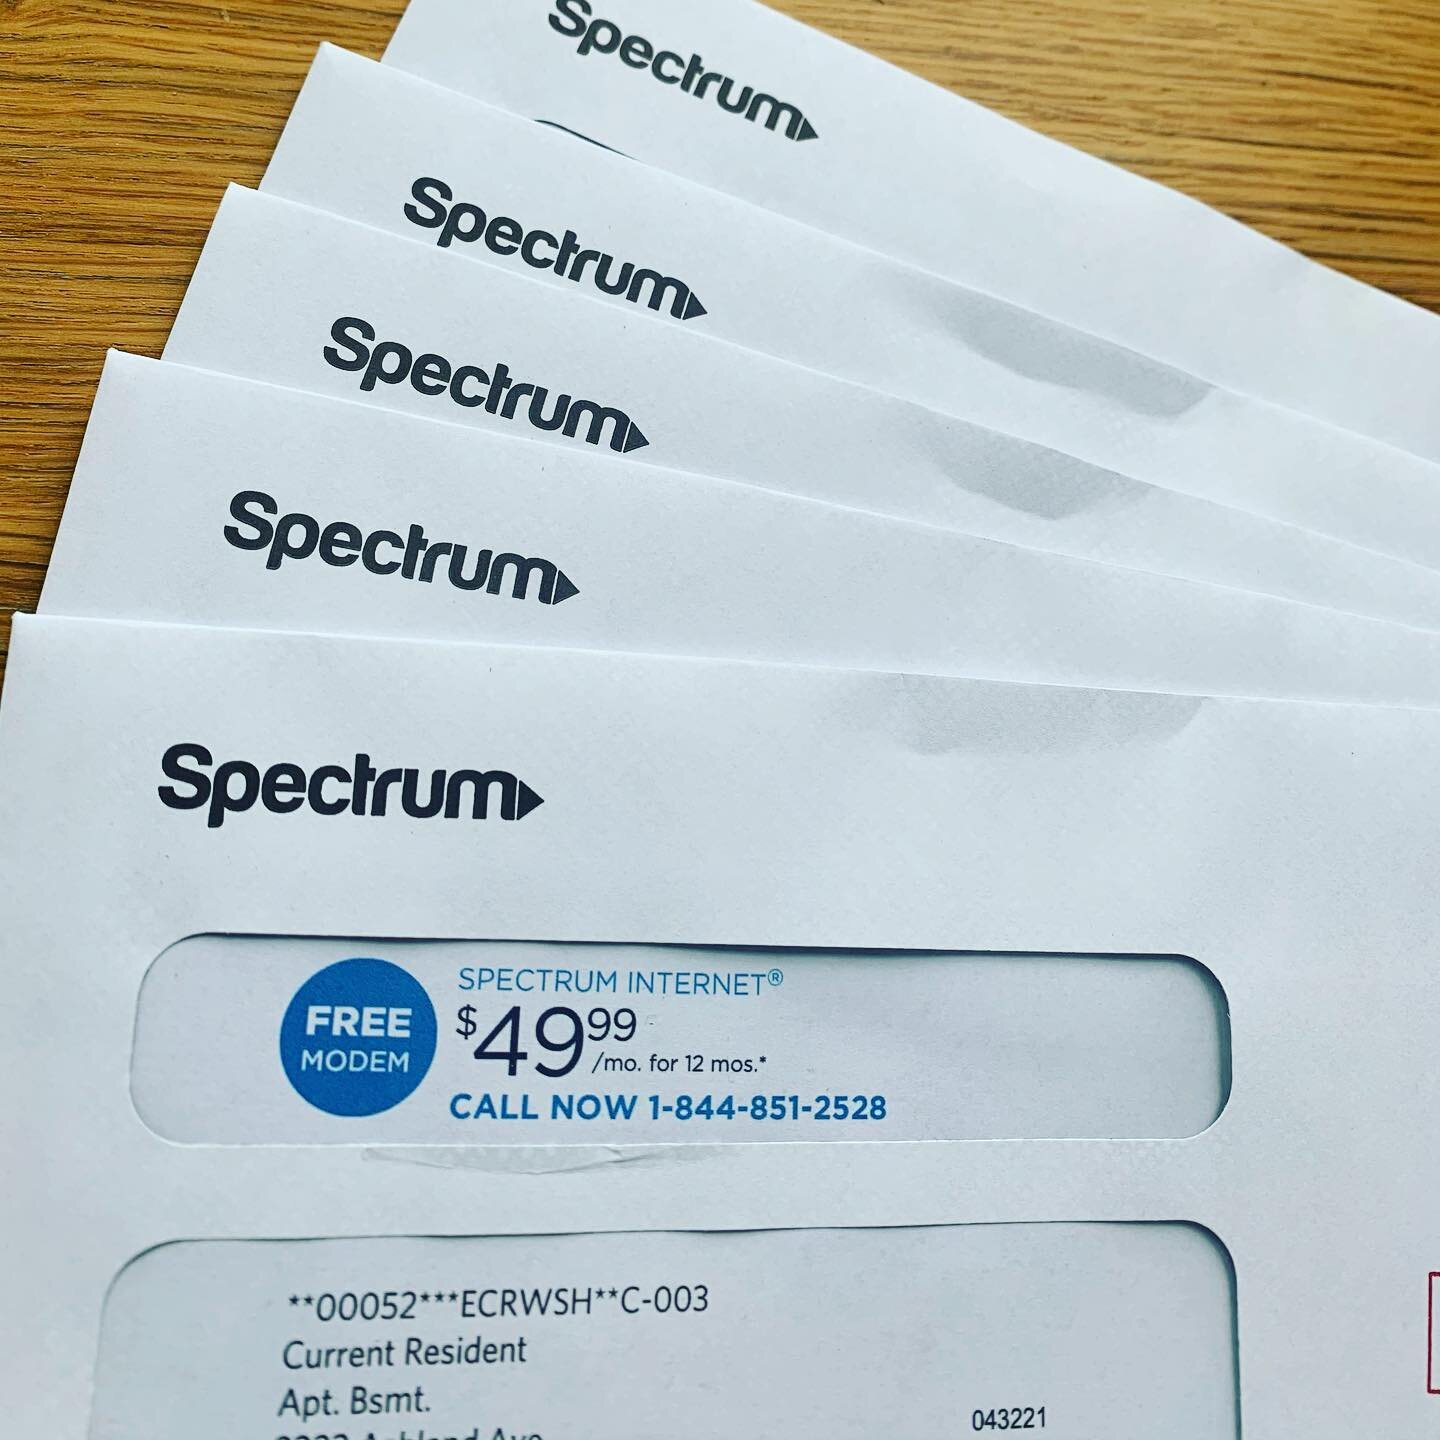 I was a cable customer for 20 years. When they jacked up the price, I tried to negotiate and they declined. Since cutting the cord, we get this haul every two weeks. 

By now the mail cost has far exceeded the price reduction I requested.